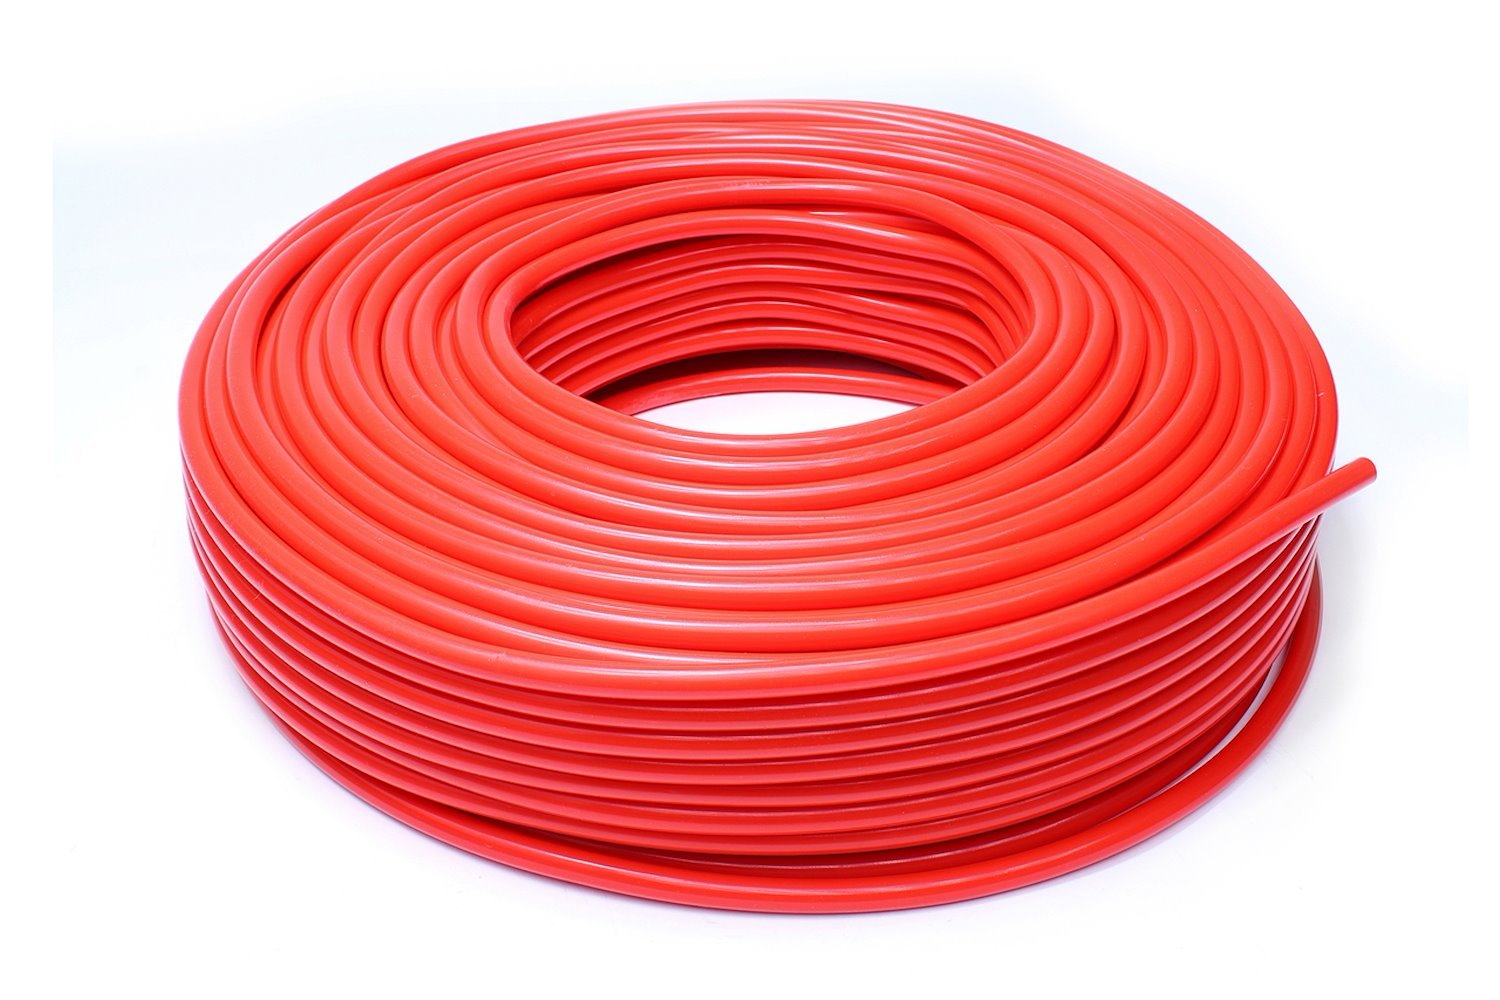 HTSVH4-REDx100 High-Temperature Silicone Vacuum Hose Tubing, 5/32 in. ID, 100 ft. Roll, Red